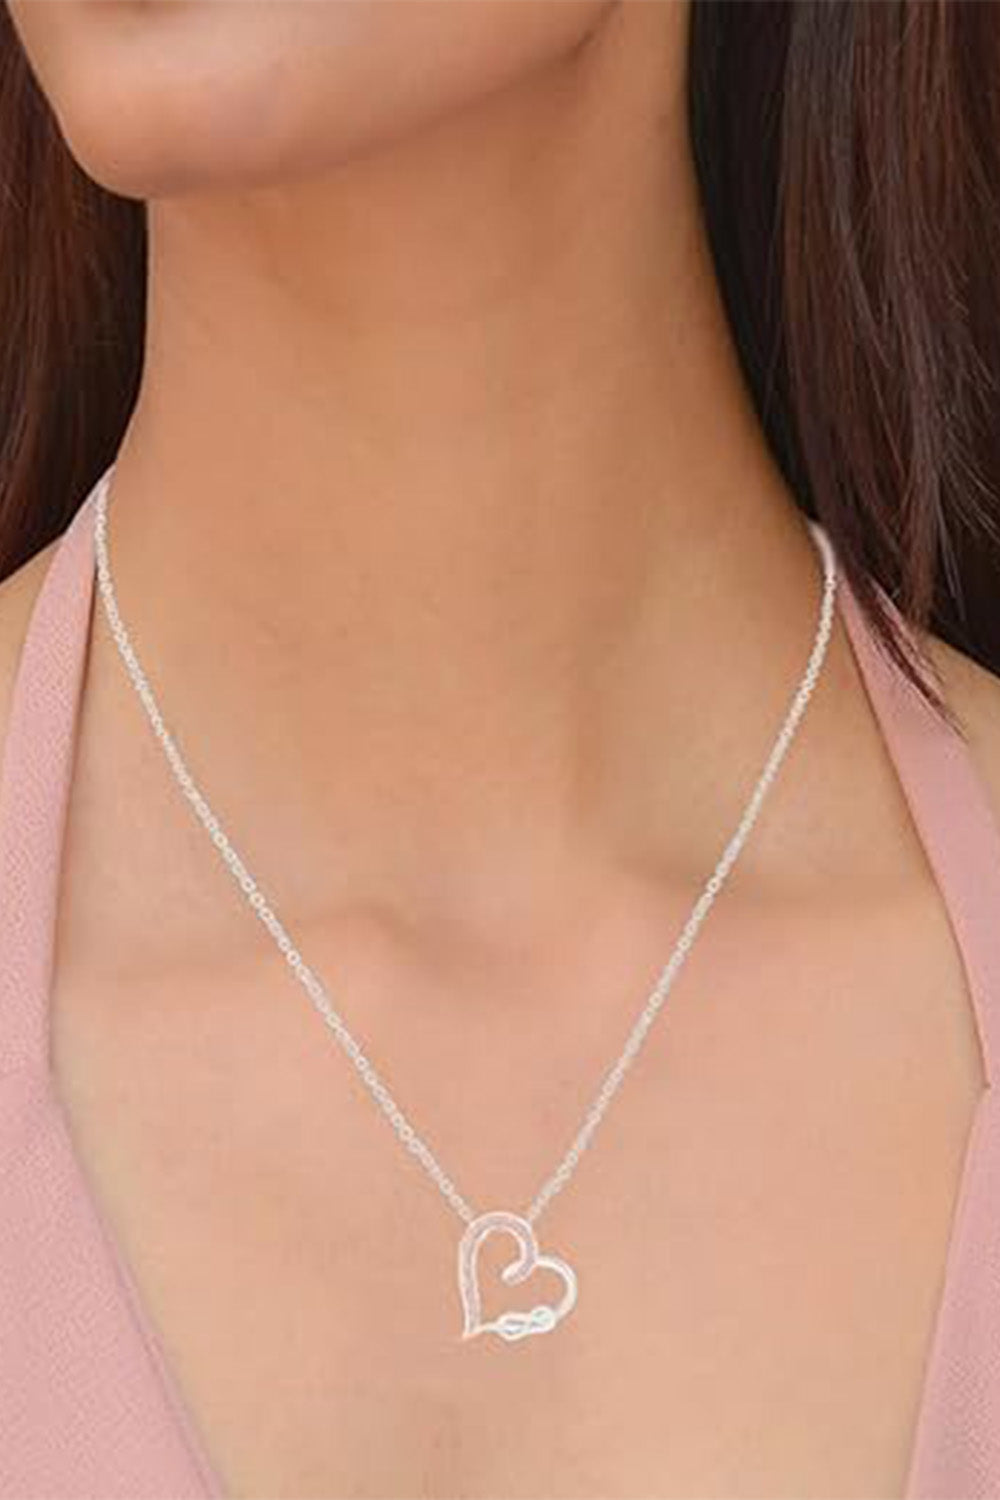 Buy Infinity Knot Heart Pendant Necklace